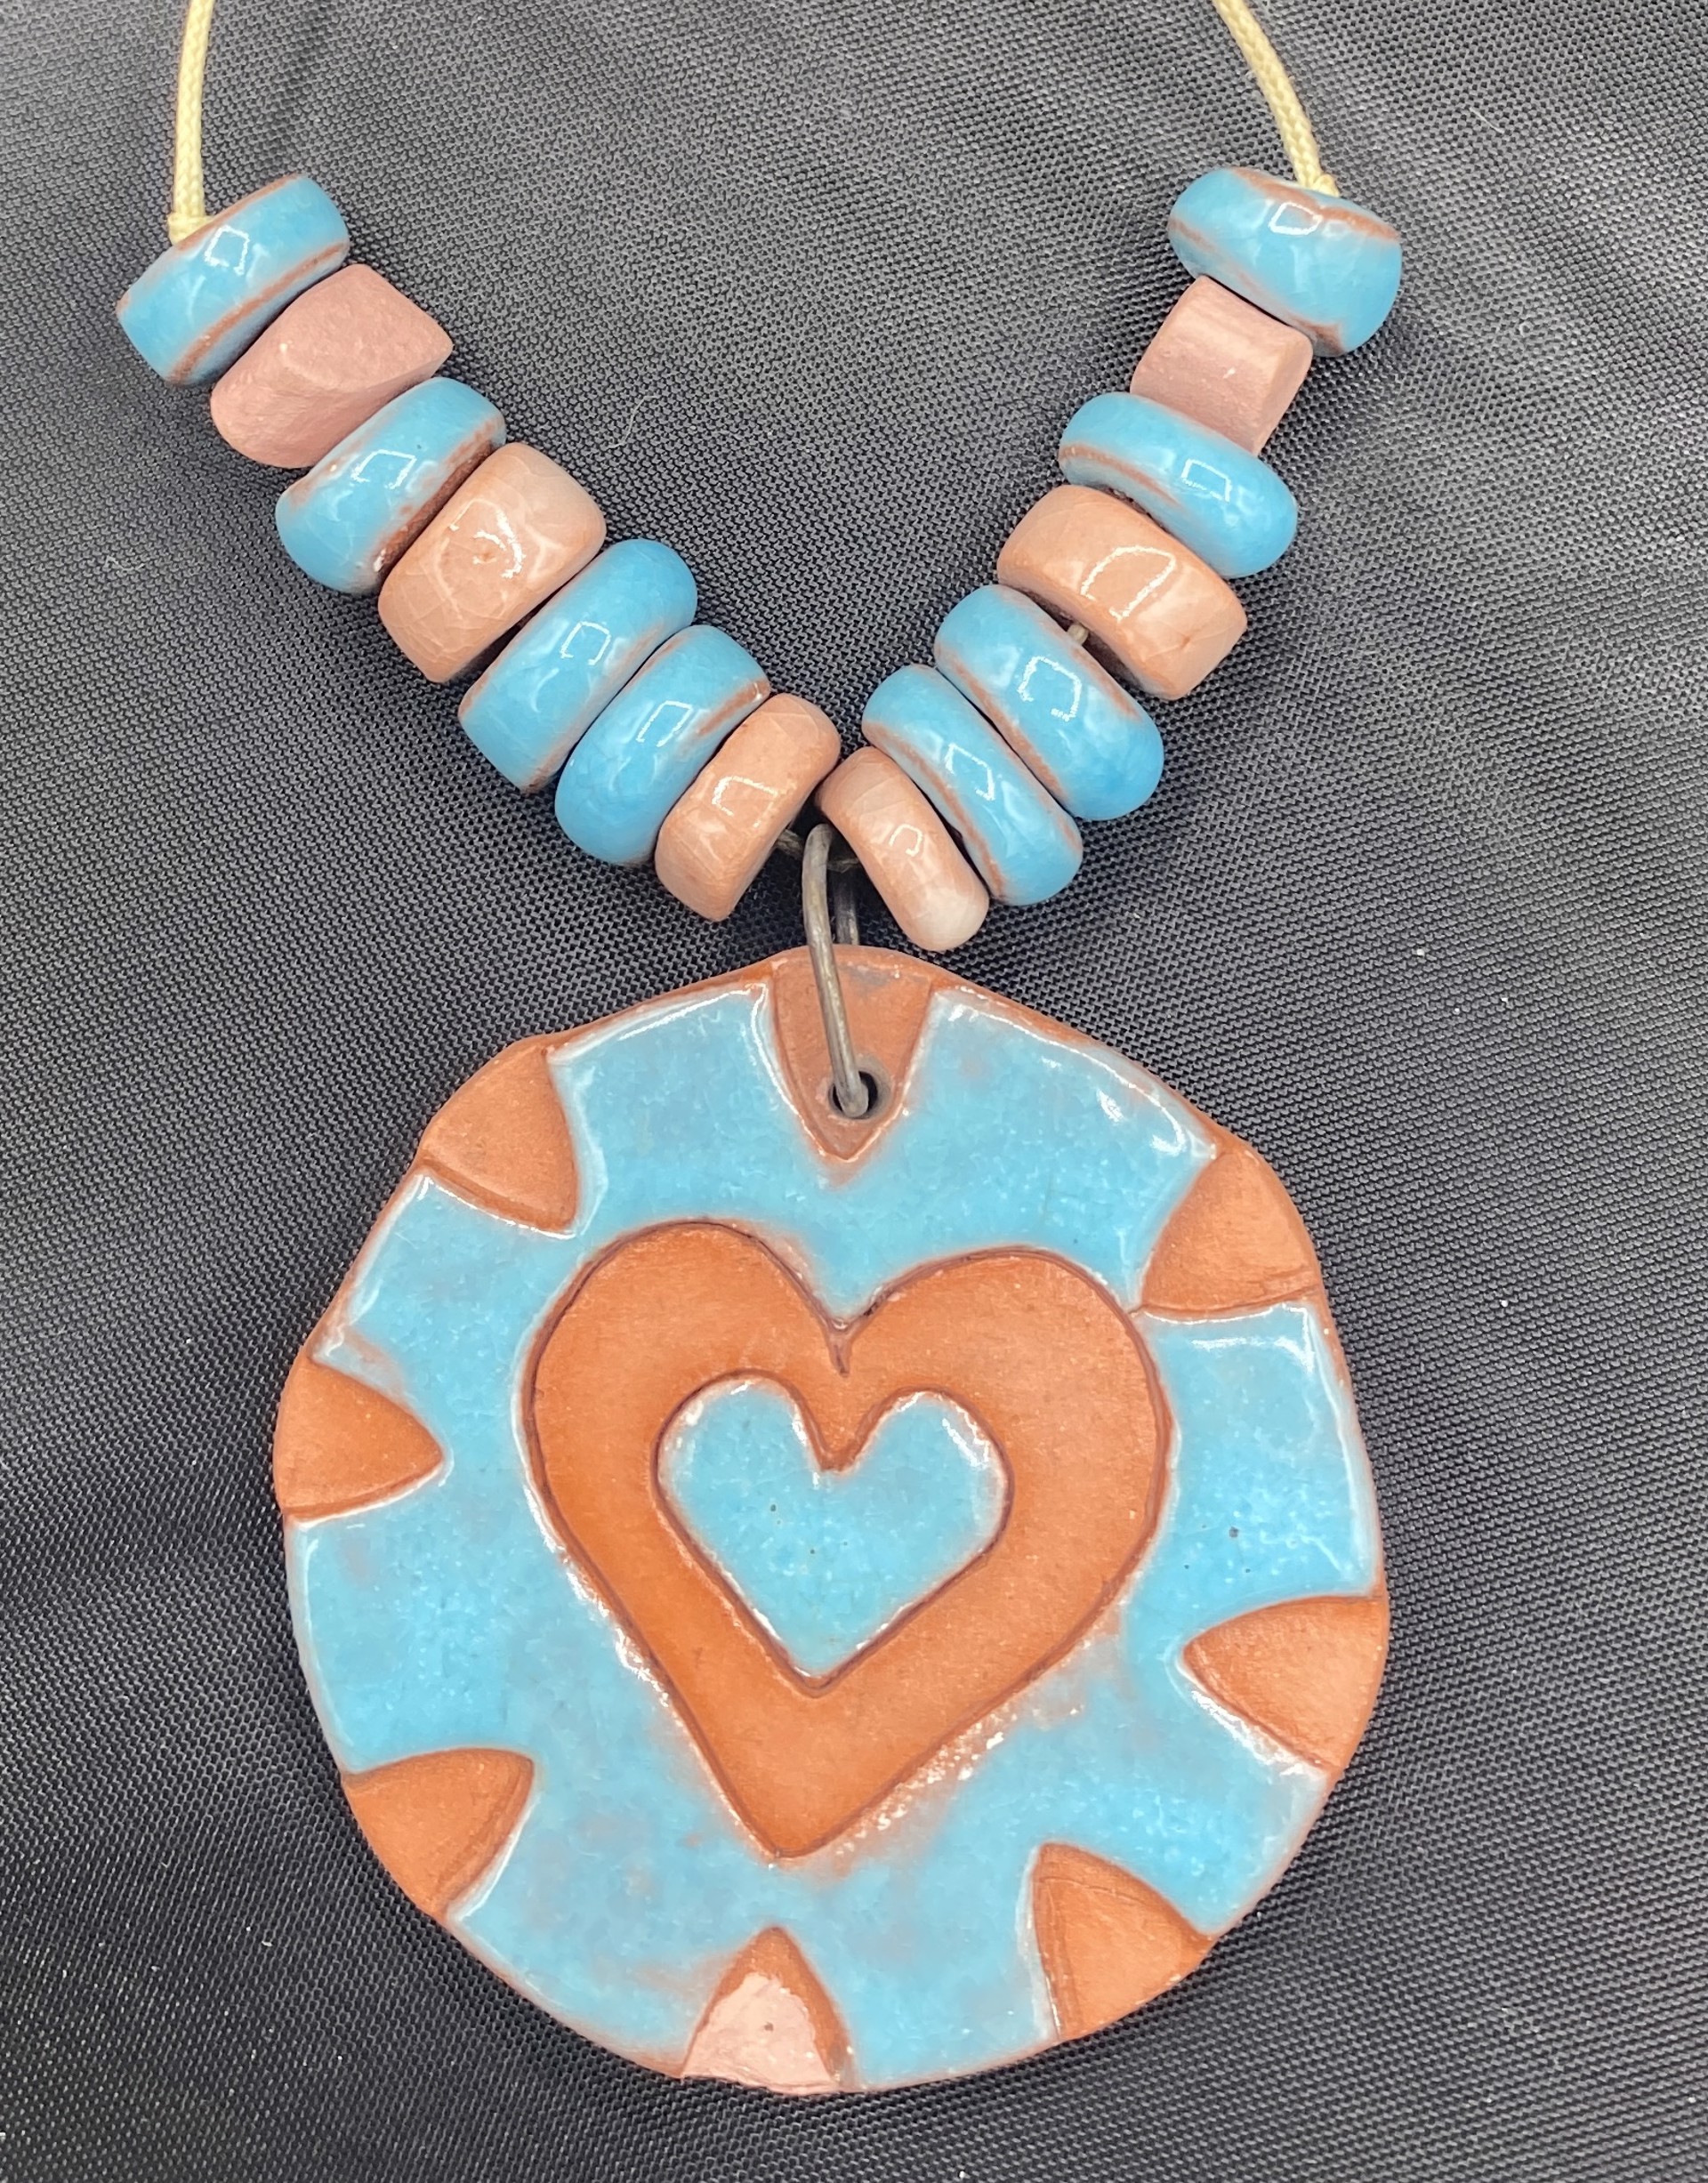 1.75" Turquoise and terracotta heart pendant with beads by Stella Sullivan